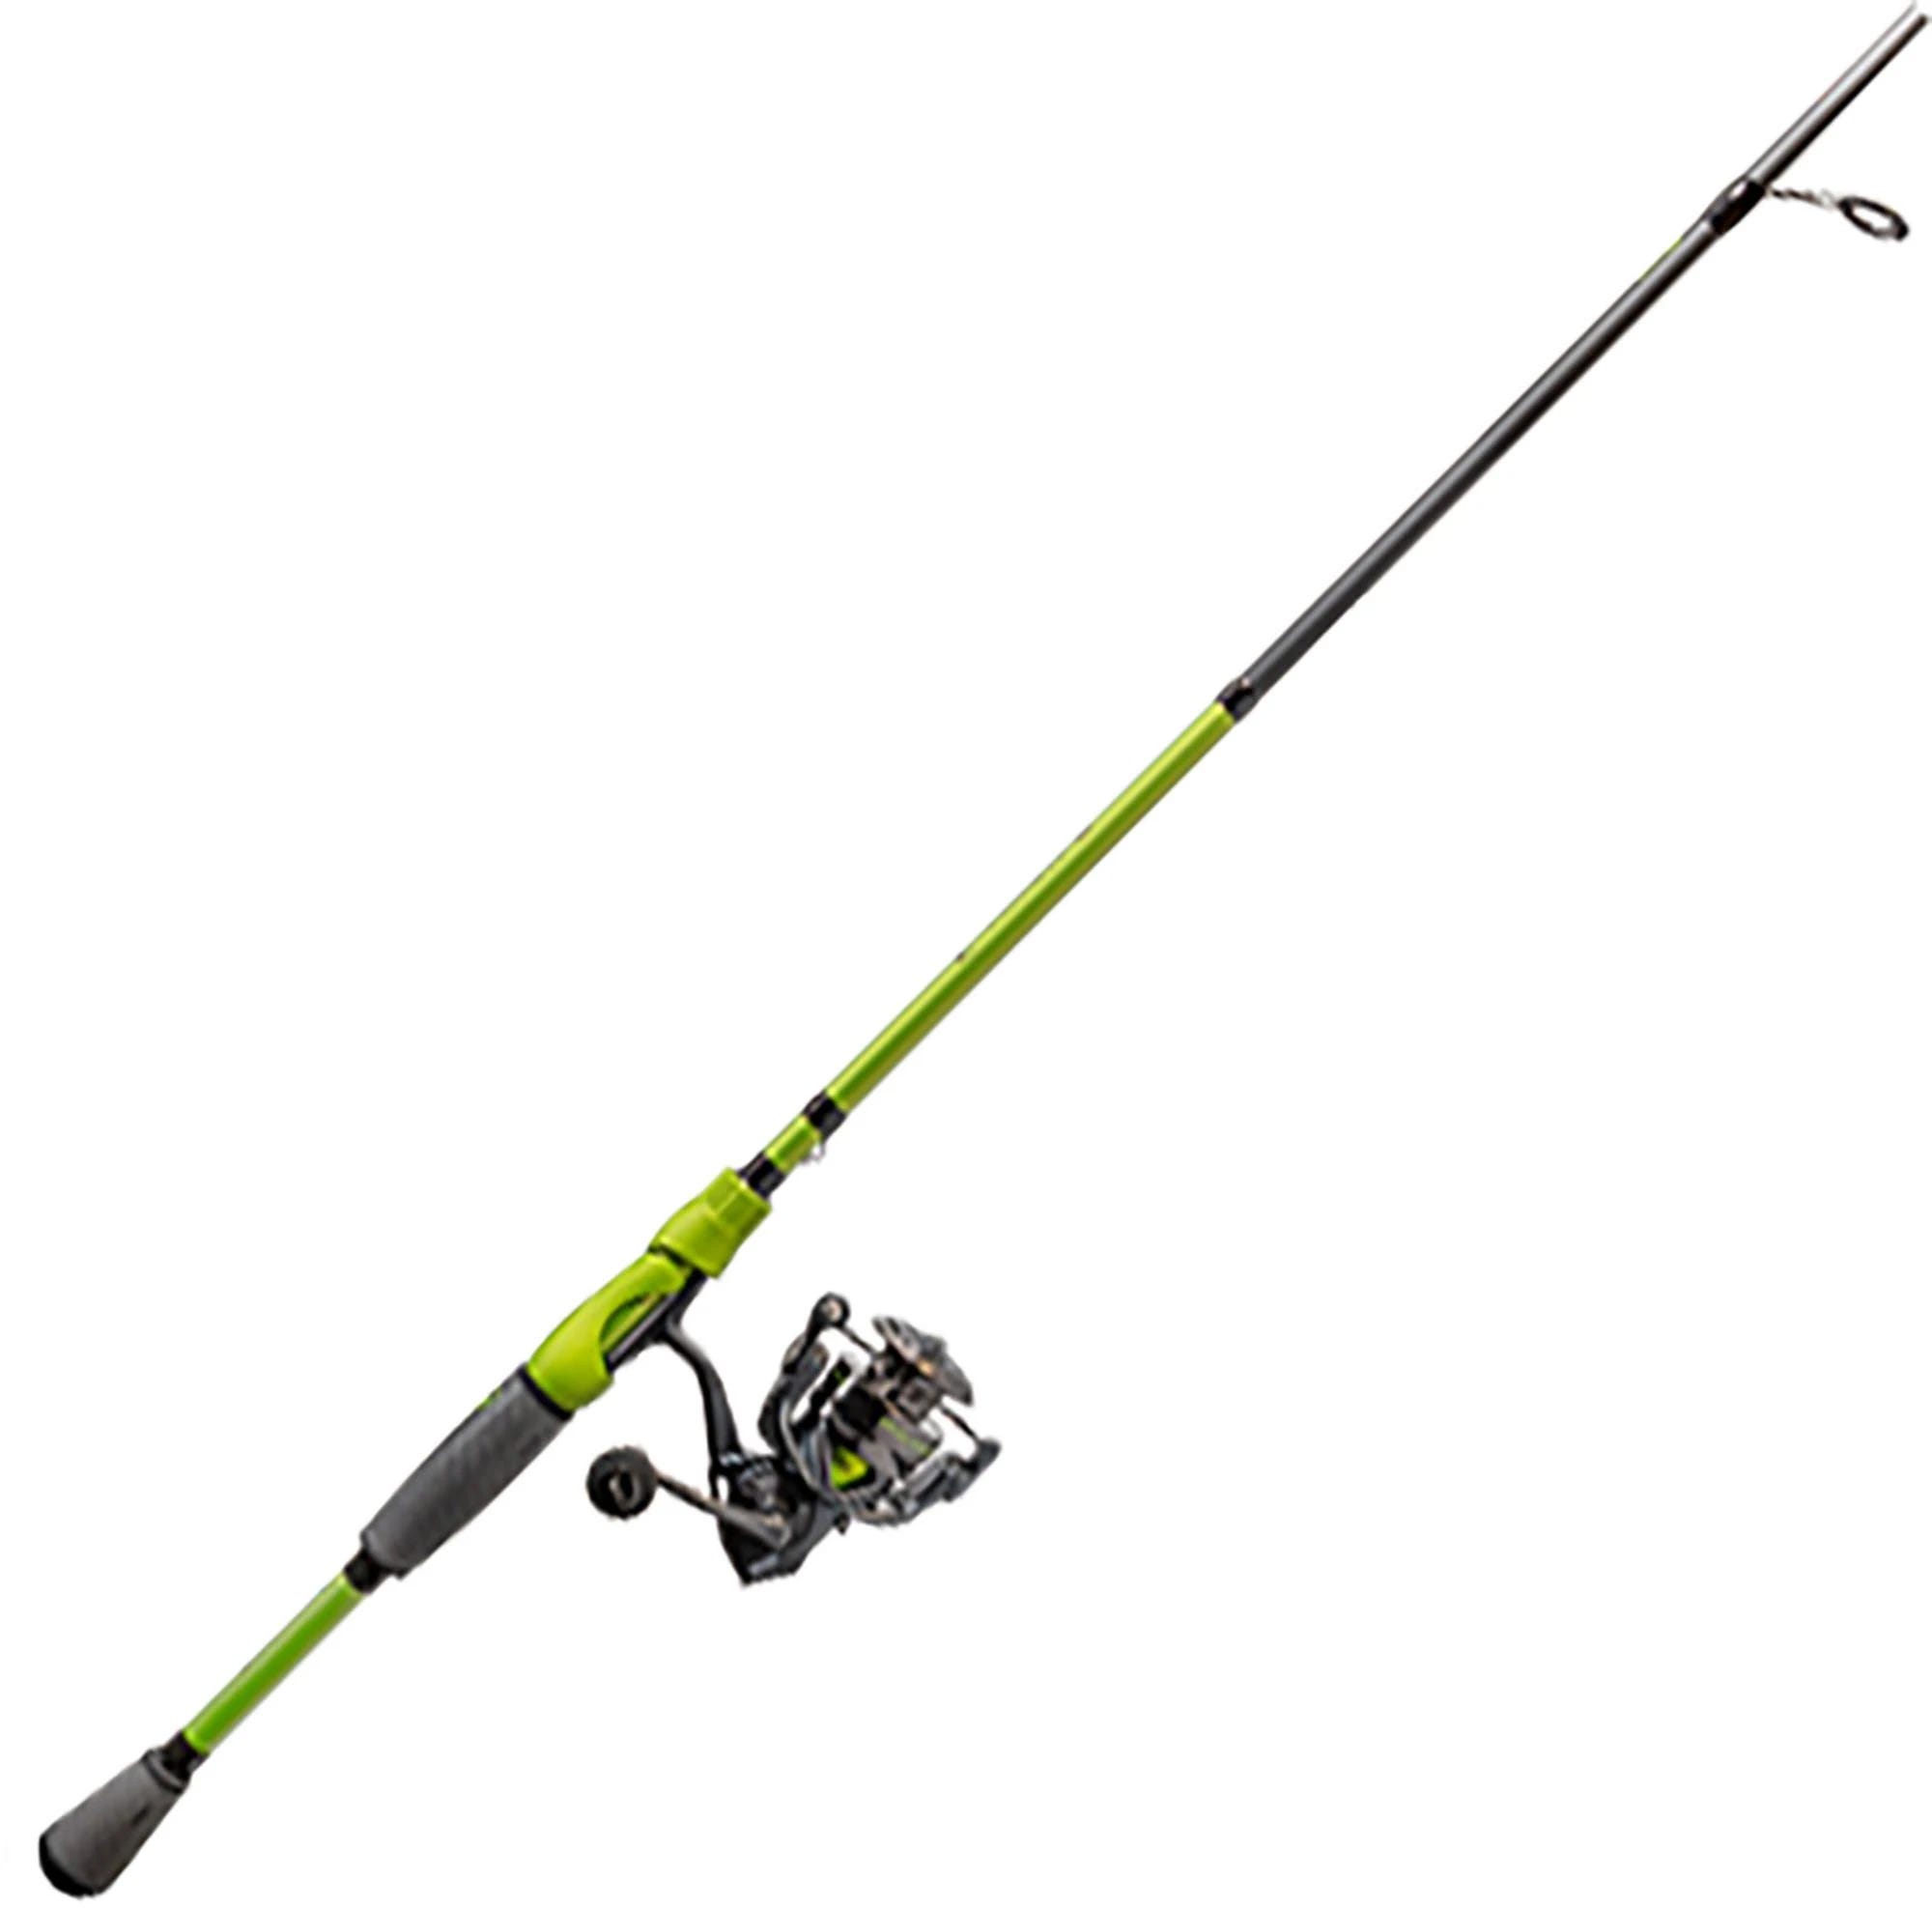 Lew's Mach 2 Spinning Combo - Lightweight, High-Performance Rod and Reel for Big Game Fishing | Image